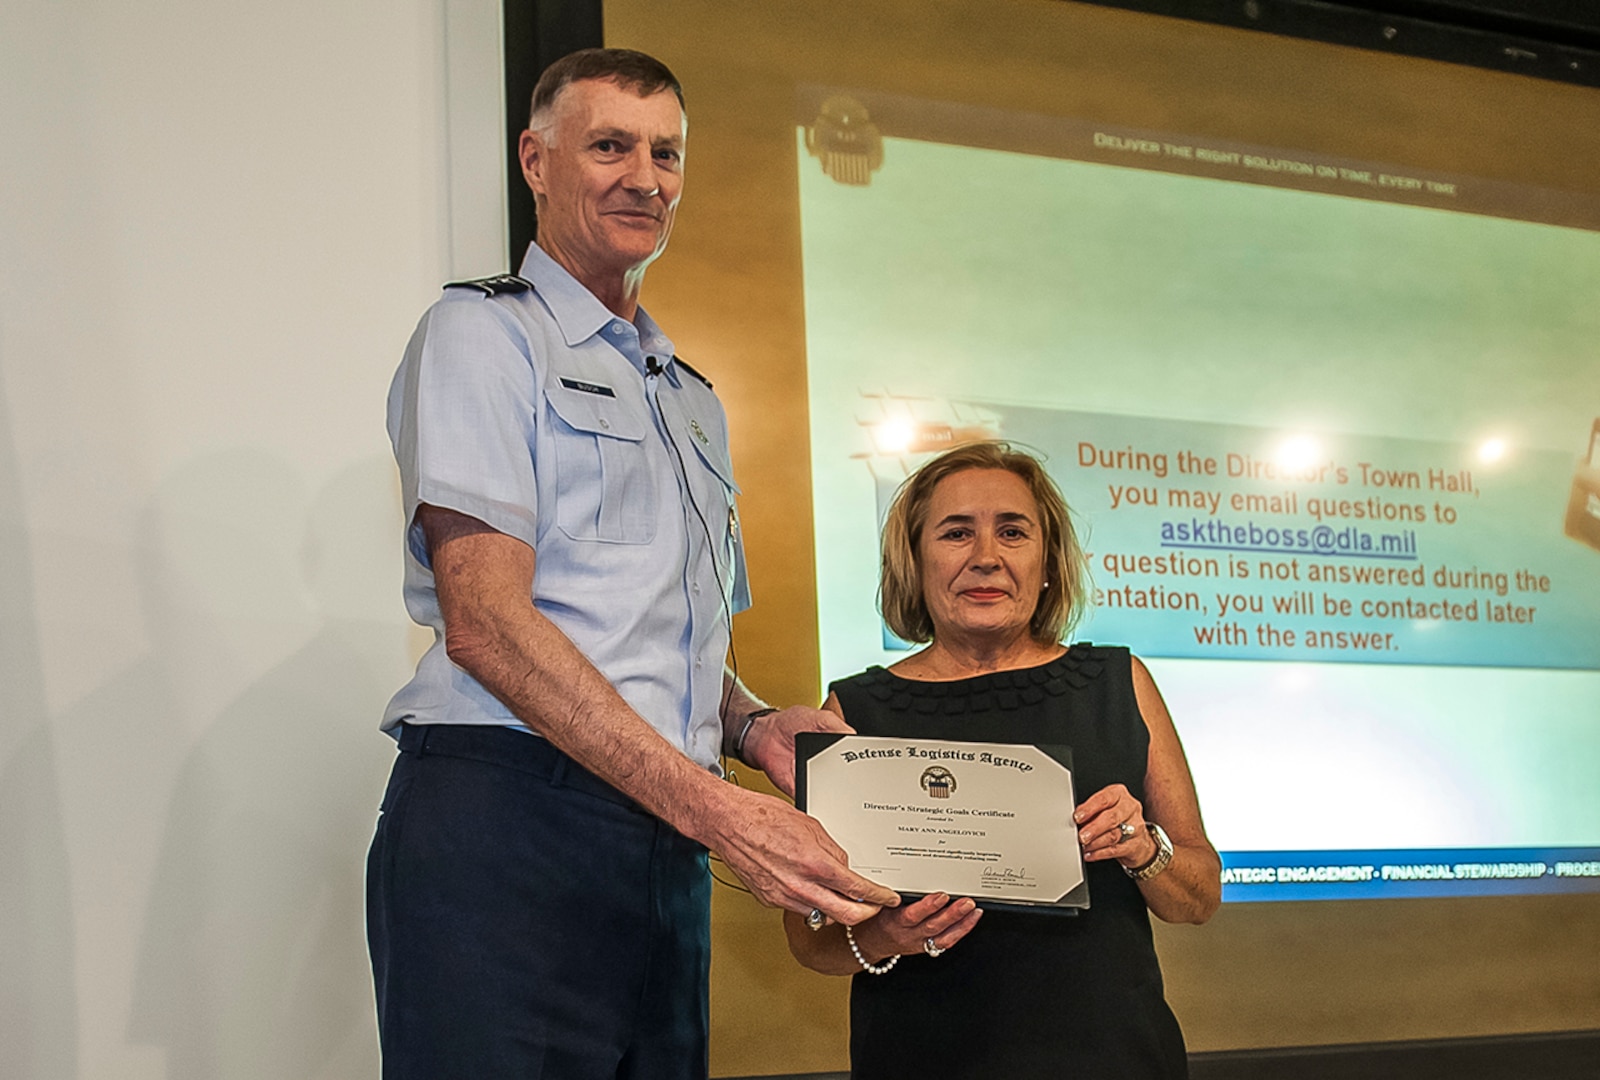 DLA Director Air Force Lt. Gen. Andy Busch presented the Warfighter First Strategic Goals Award to Mary Ann Angelovich Aug. 17 inside DSCC’s Building 11 auditorium during a town hall. Angelovich works as a Purchasing Agent with Land Supplier Operations.